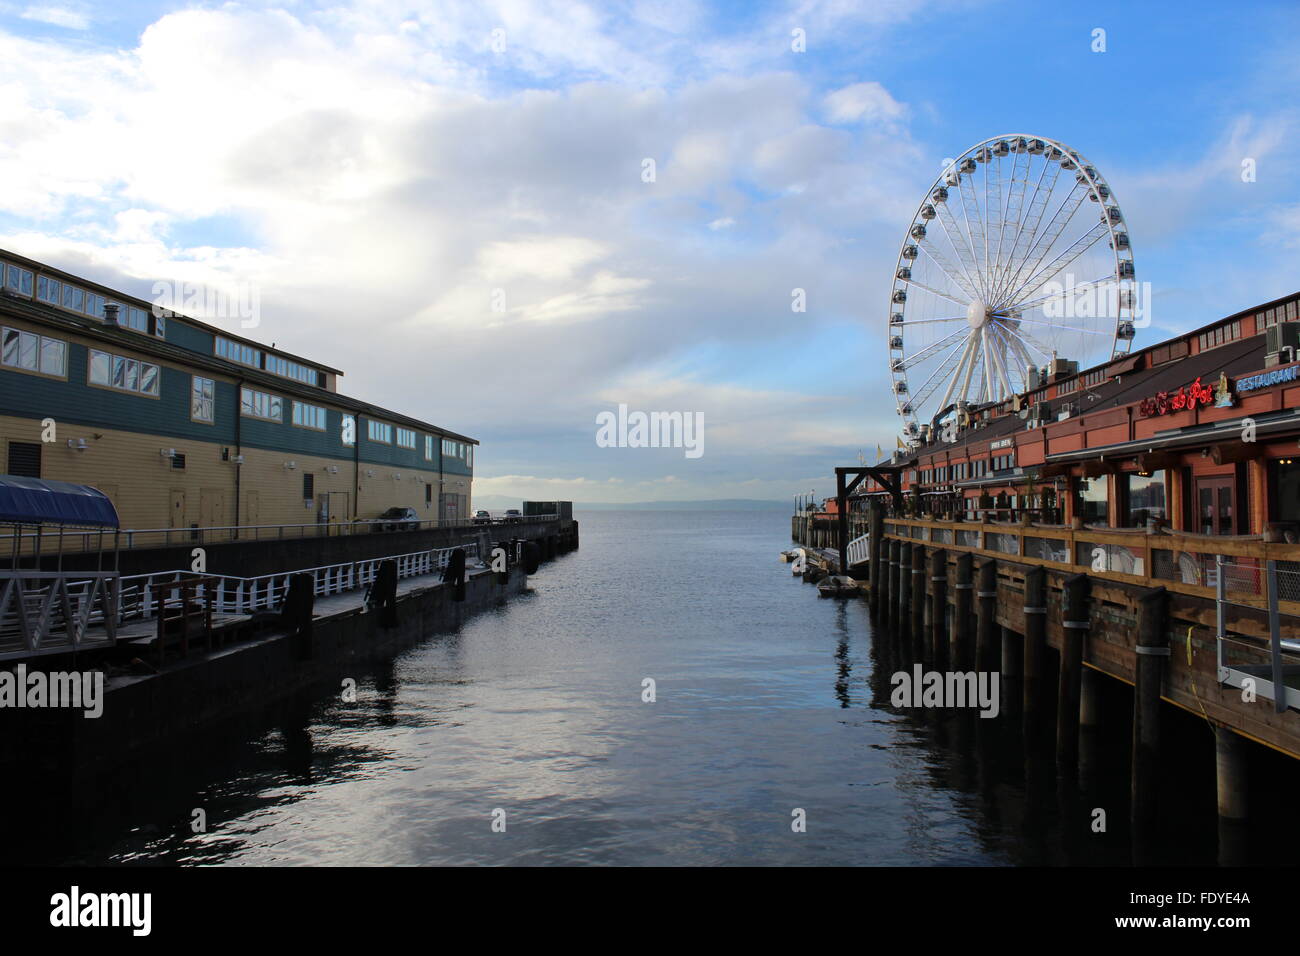 Puget Sound between two piers Stock Photo